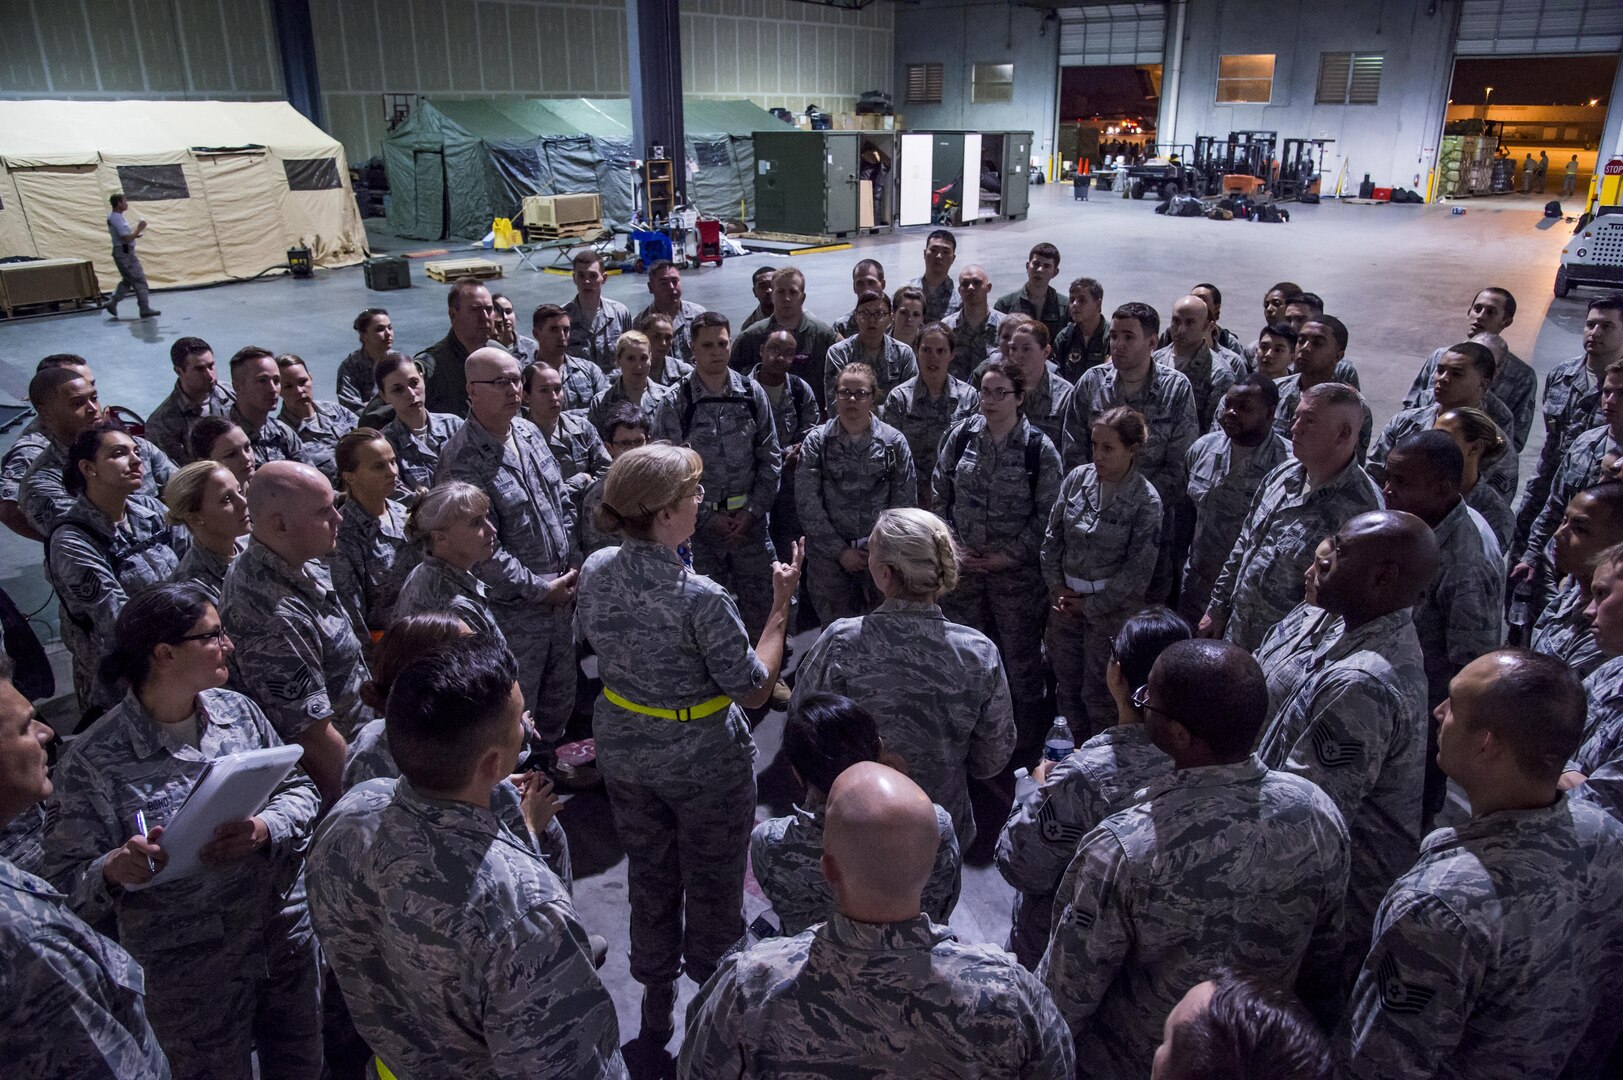 The Warrior Medics from the 59th Medical Wing, Joint Base San Antonio-Lackland, Texas, muster together at the George Bush Intercontinental Airport in Houston, Texas, concerning the response and relief efforts following the devastation caused by Hurricane Harvey, August 30, 2017. The 59th MDW is part of a larger Department of Defense presence in an effort to aid eastern Texas following a record amount of rainfall and flooding. (U.S. Air Force photo/Senior Airman Keifer Bowes)